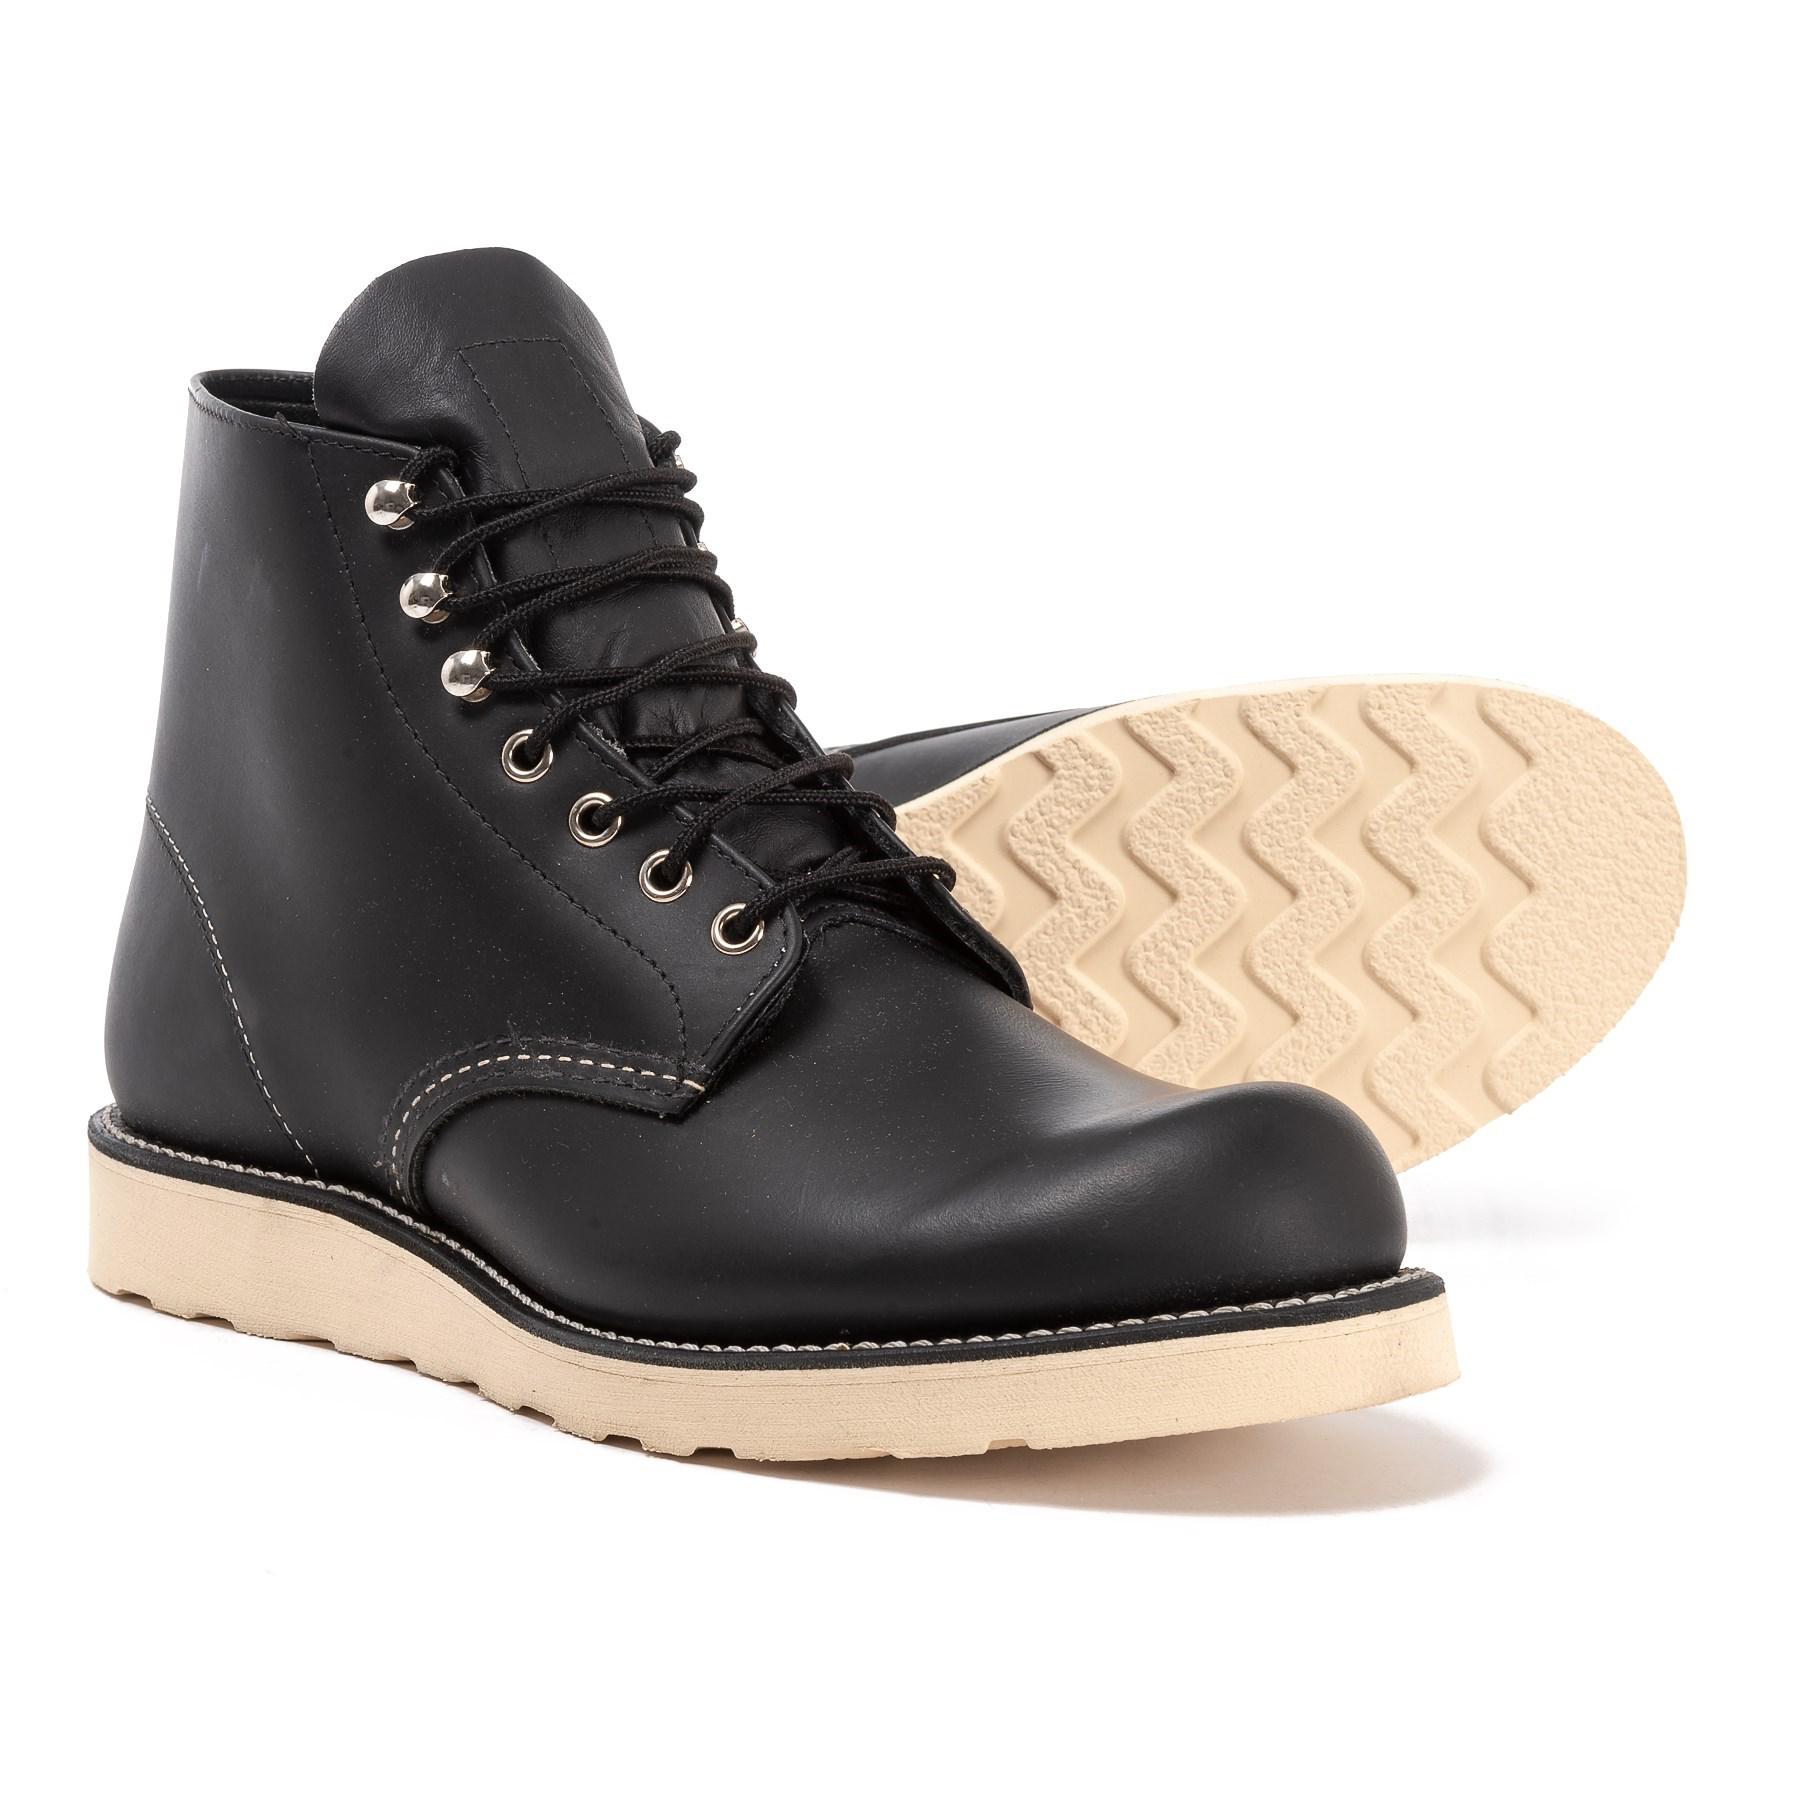 red wing classic round toe